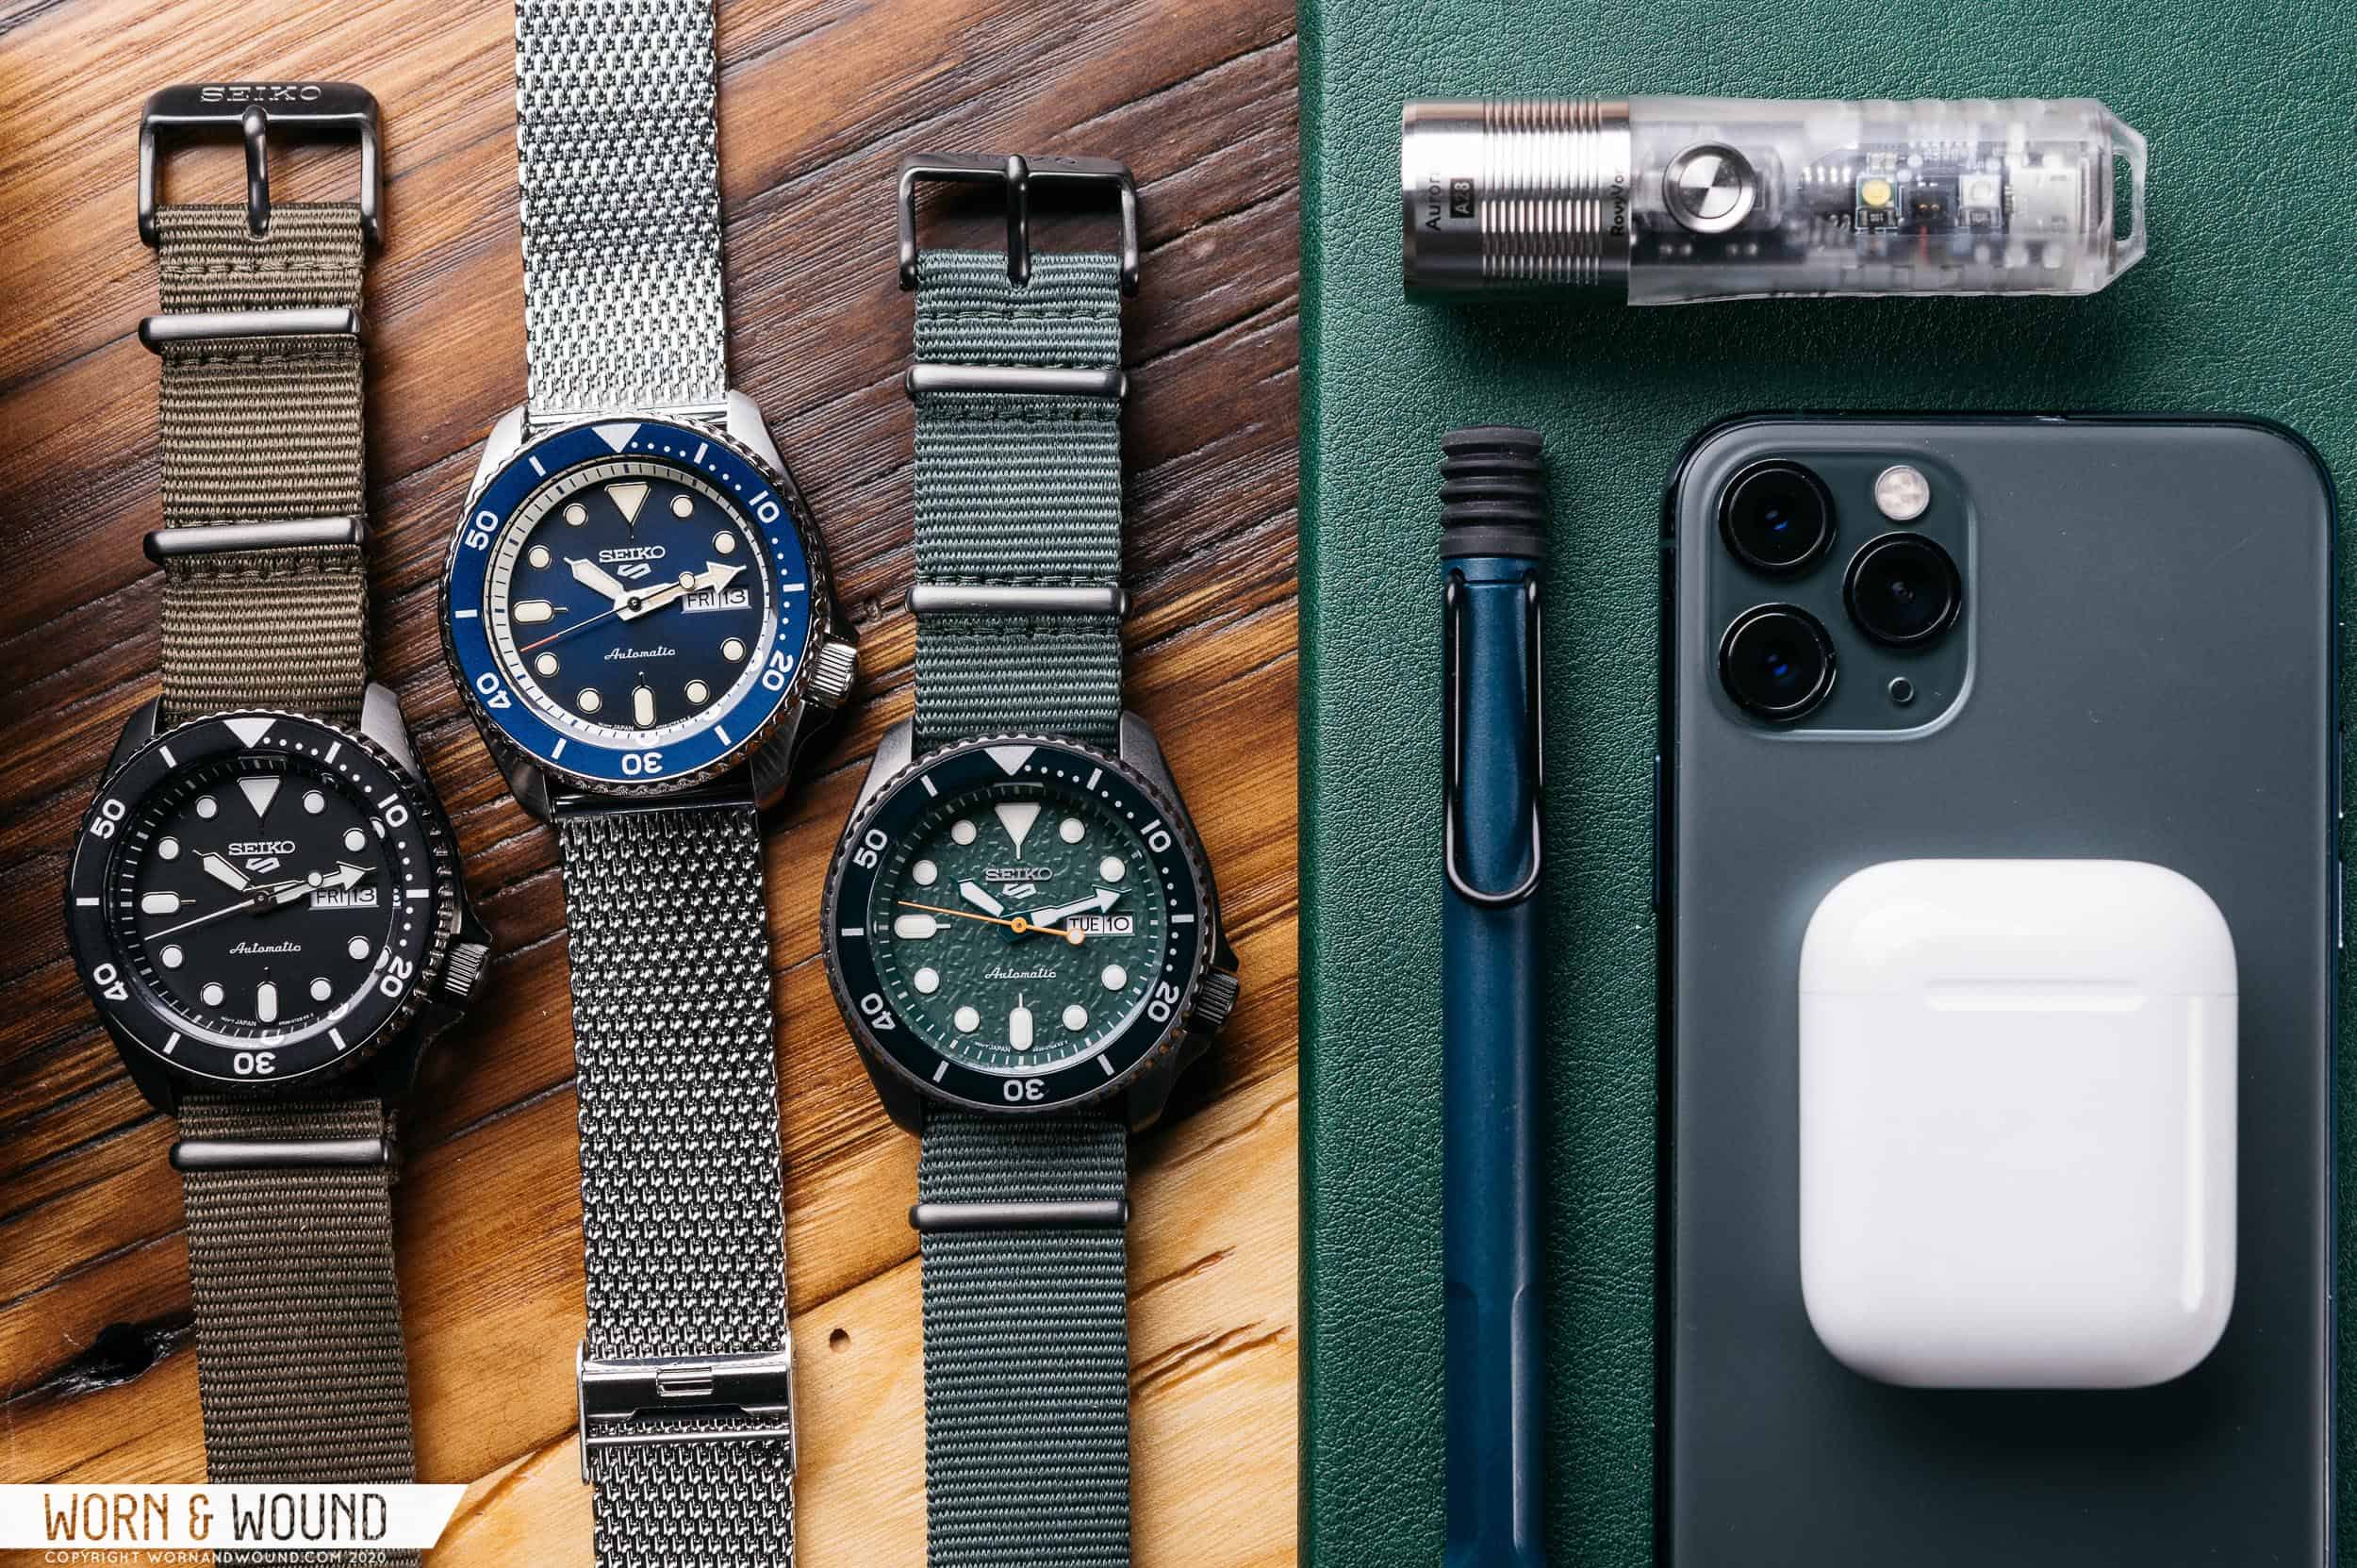 Mesh and Match with Seiko SKX 007 & New Seiko 5 Sports Models